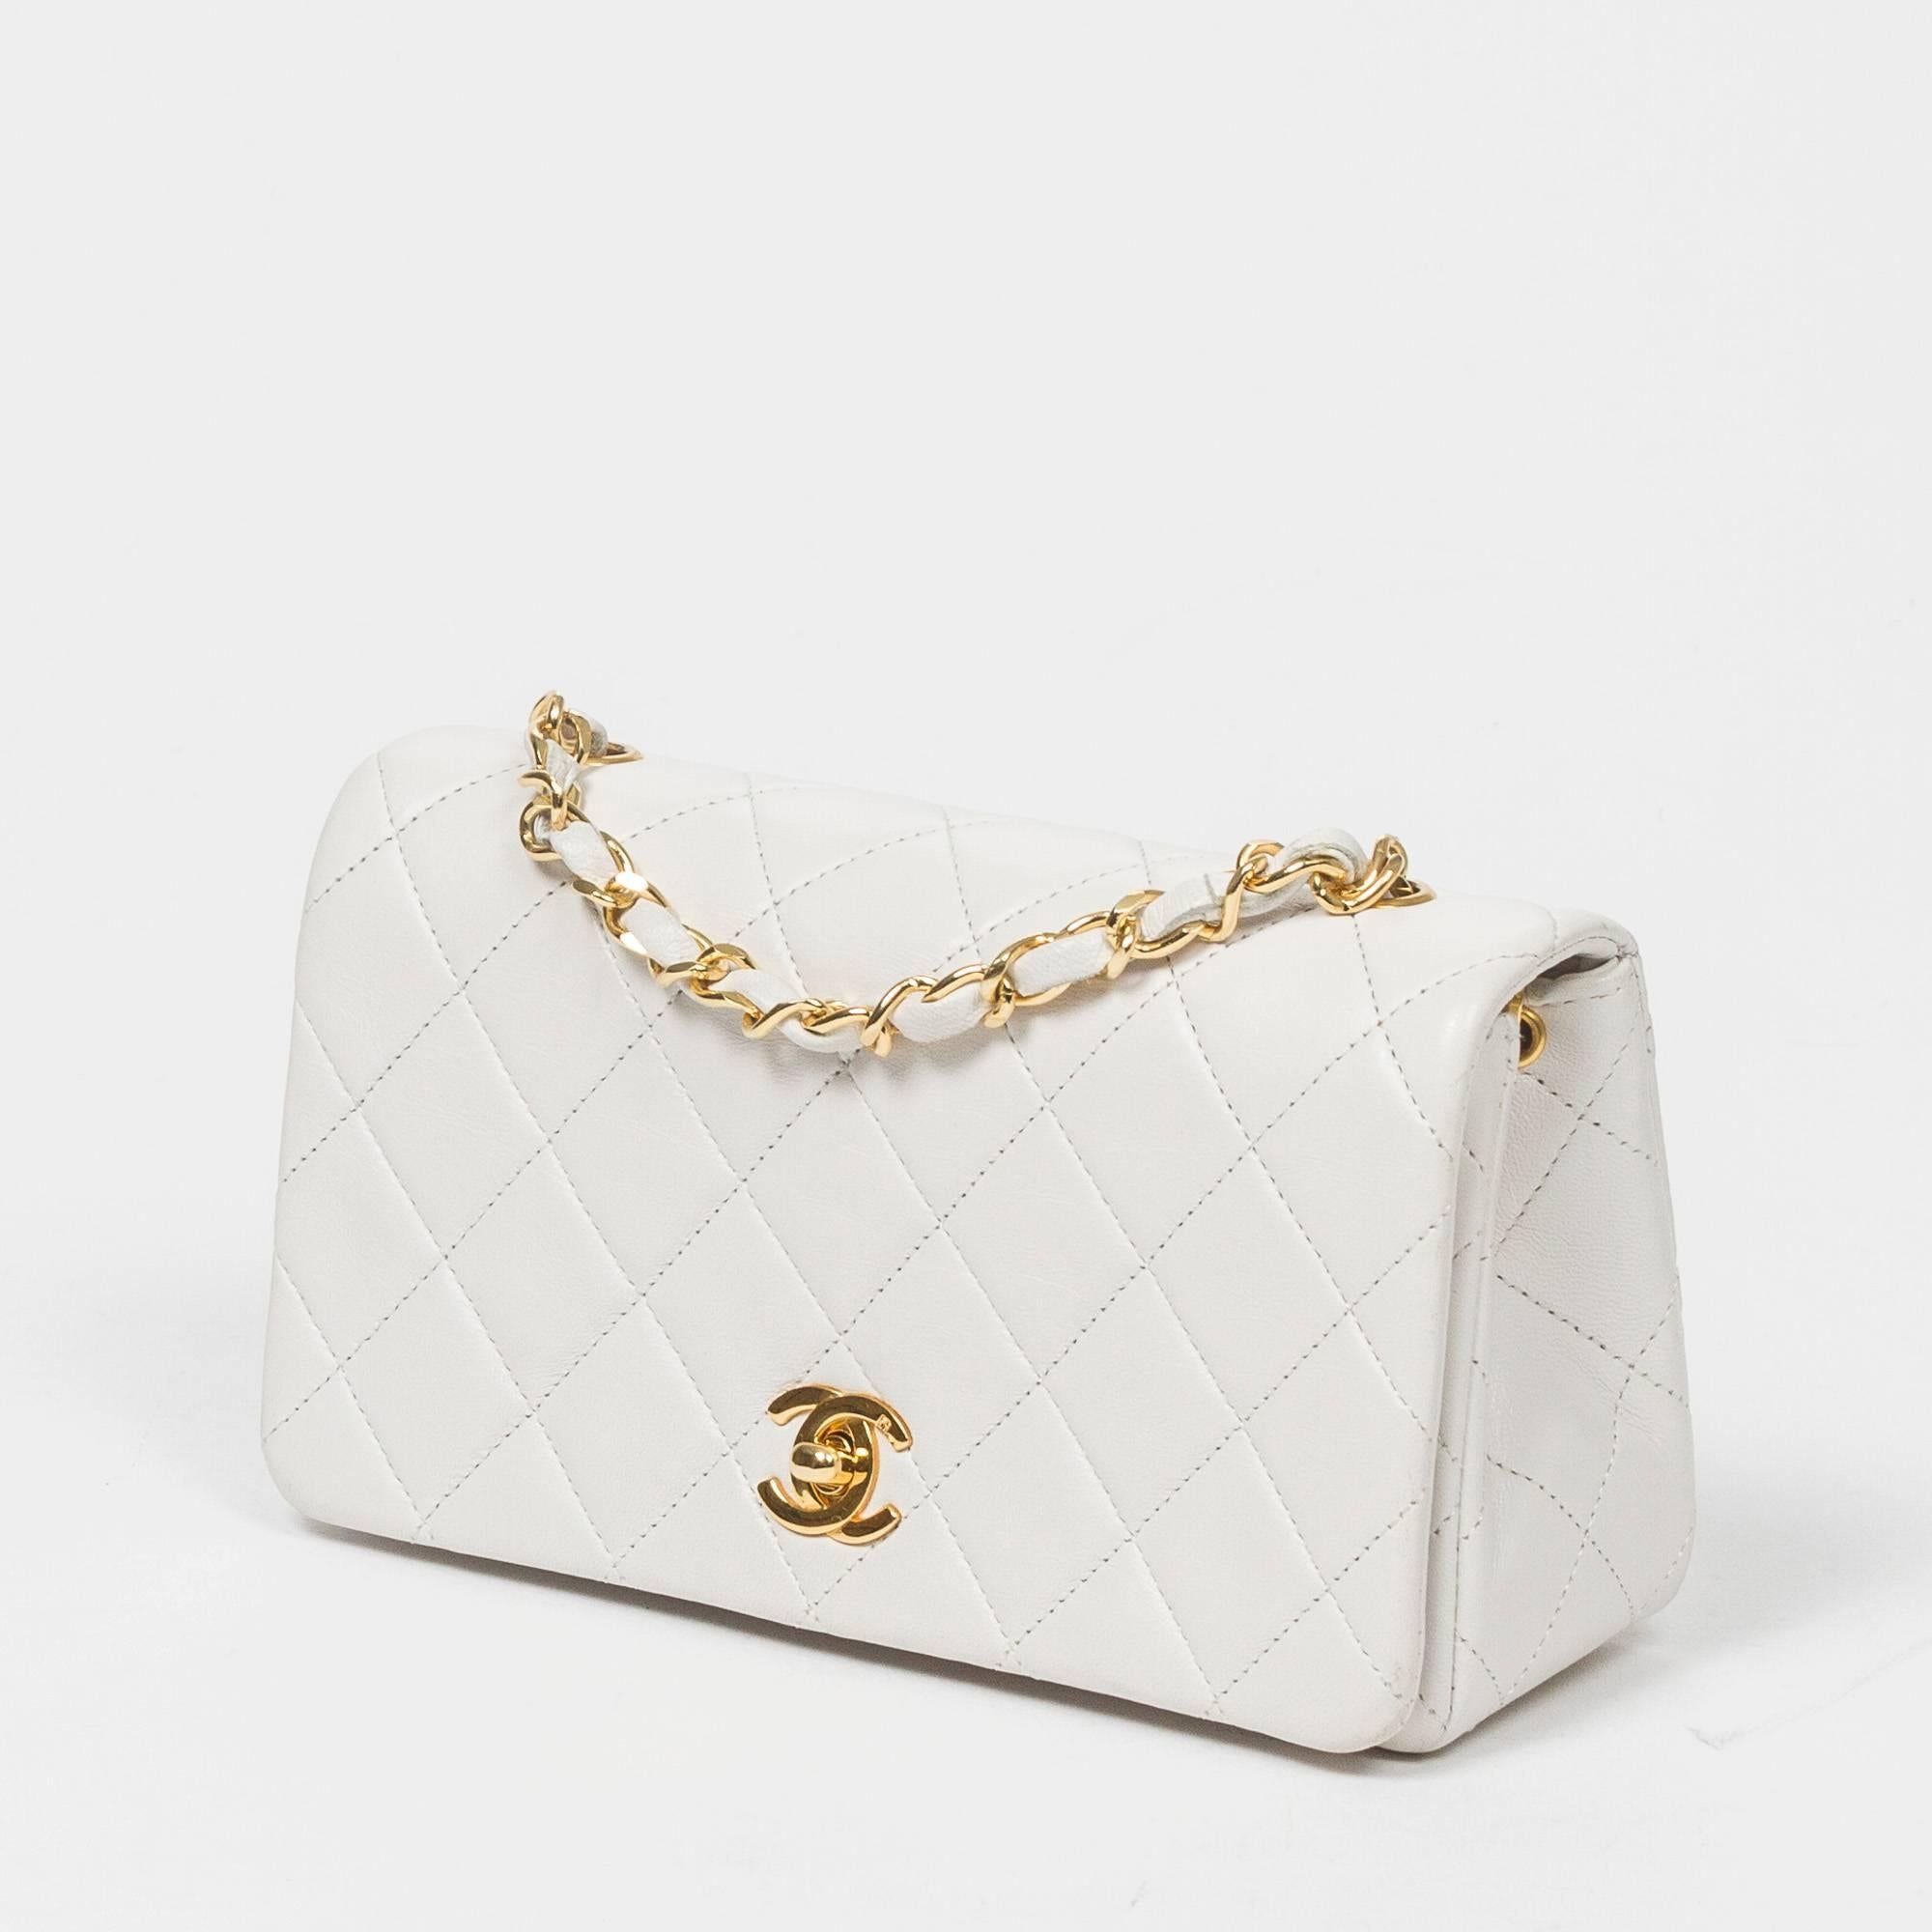 Vintage Full Flap Bag in white quilted lambskin with gold tone chain strap interlaced with white leather. Gold CC turnlock closure. White leather interior with 3 slip pockets. Gold tone heat stamps 